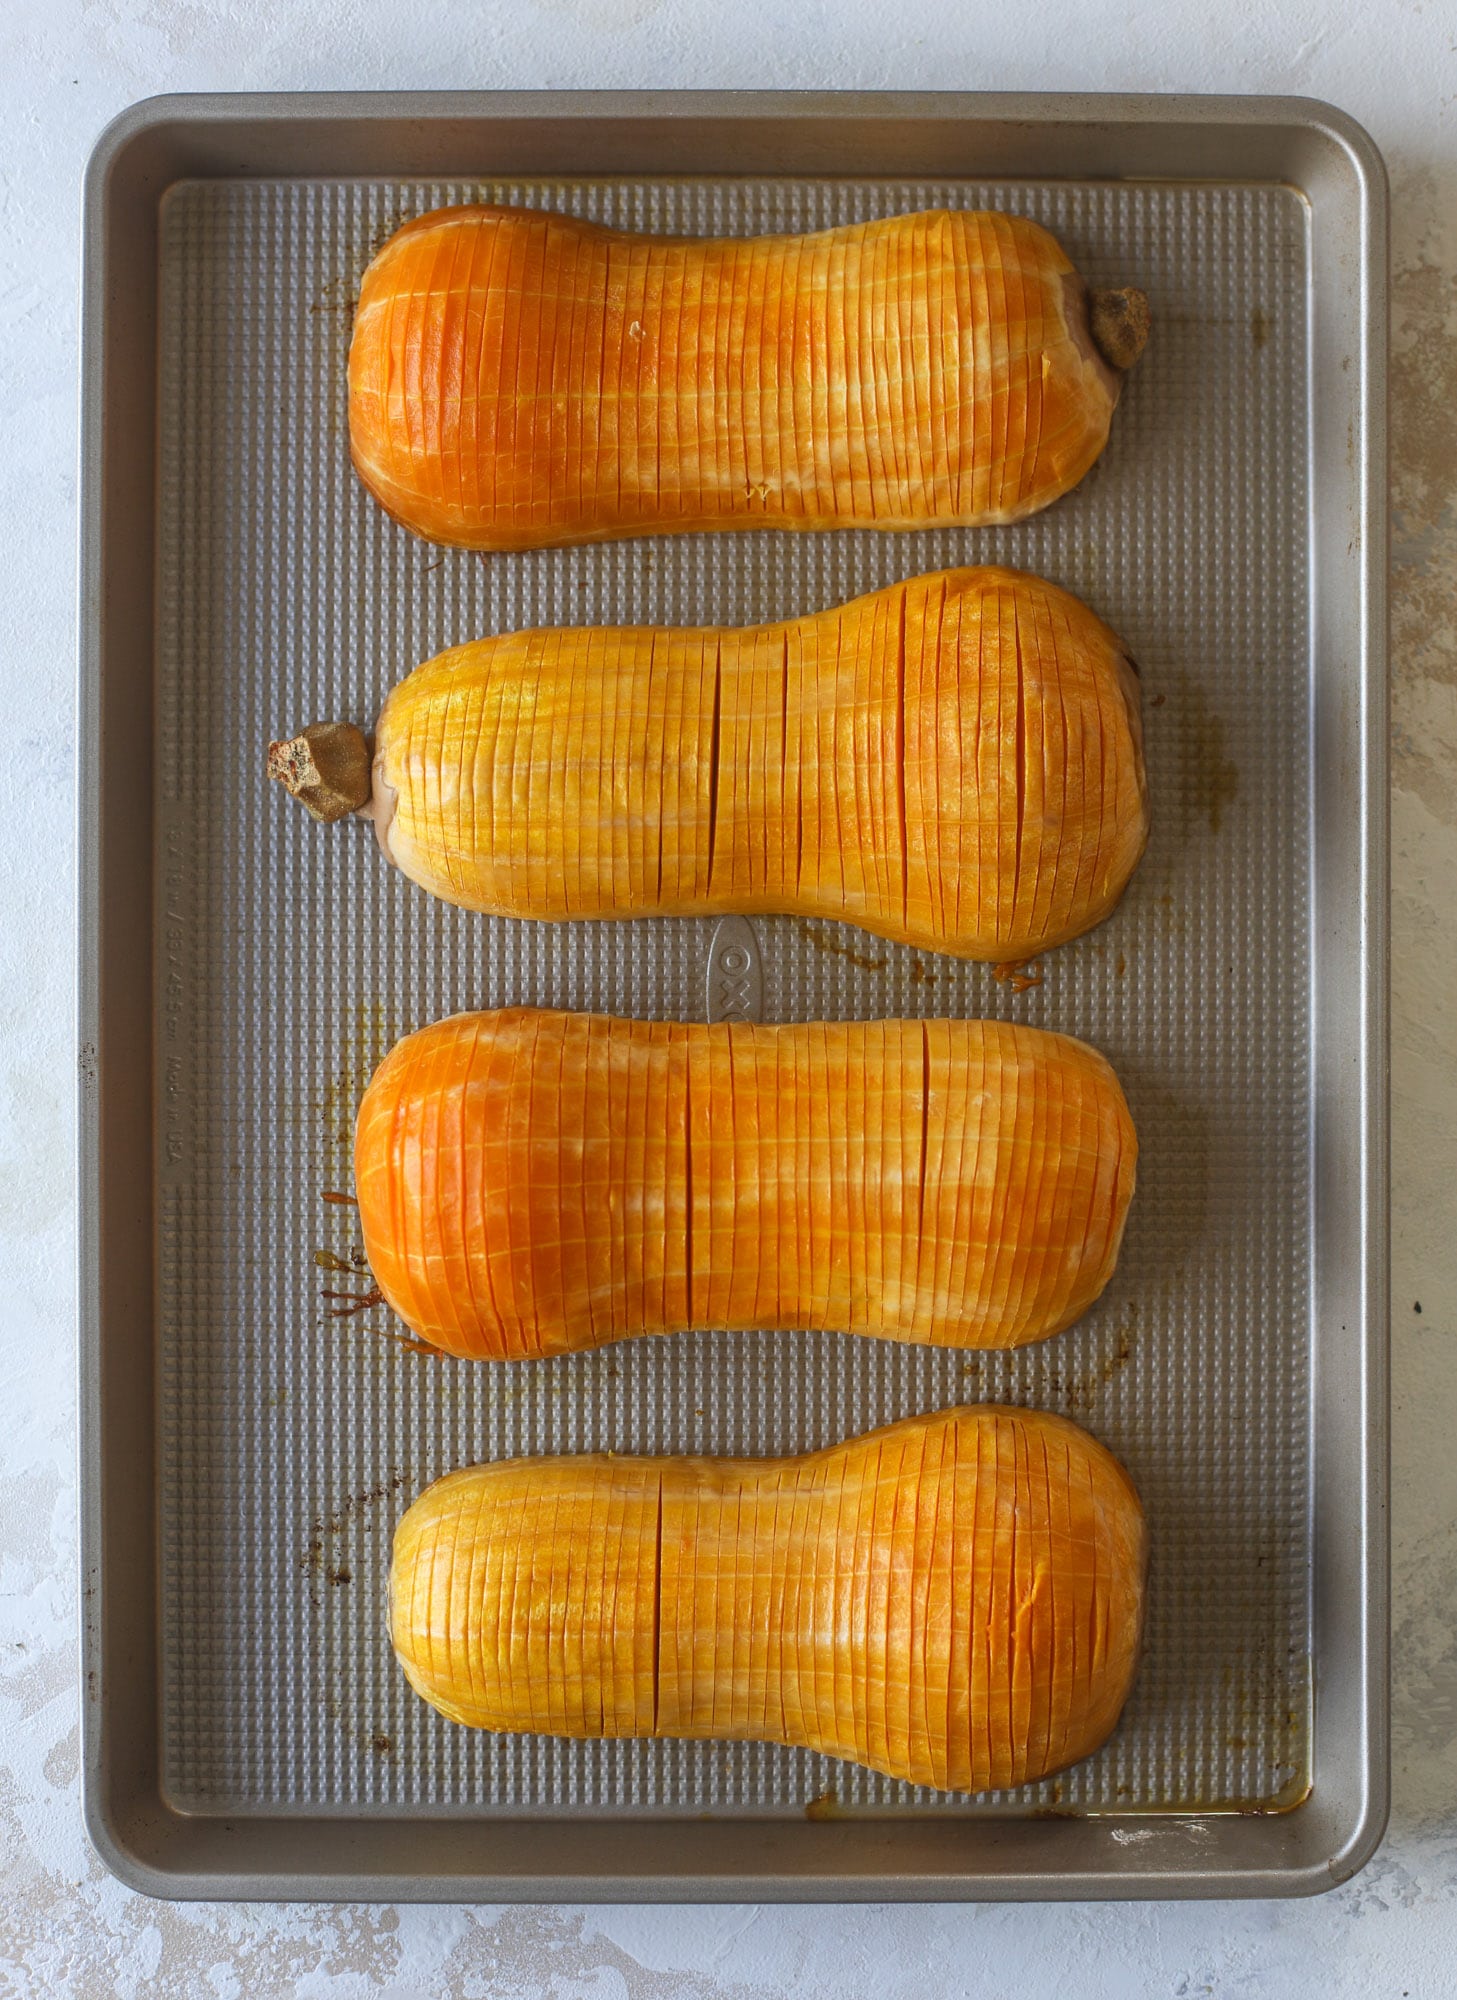 This hasselback butternut squash is perfect for Thanksgiving - and you can easily make it two ways! We have a maple pecan hassleback butternut squash and a brown butter sage hasselback butternut squash. Delicious! I howsweeteats.com #hasselback #butternutsquash